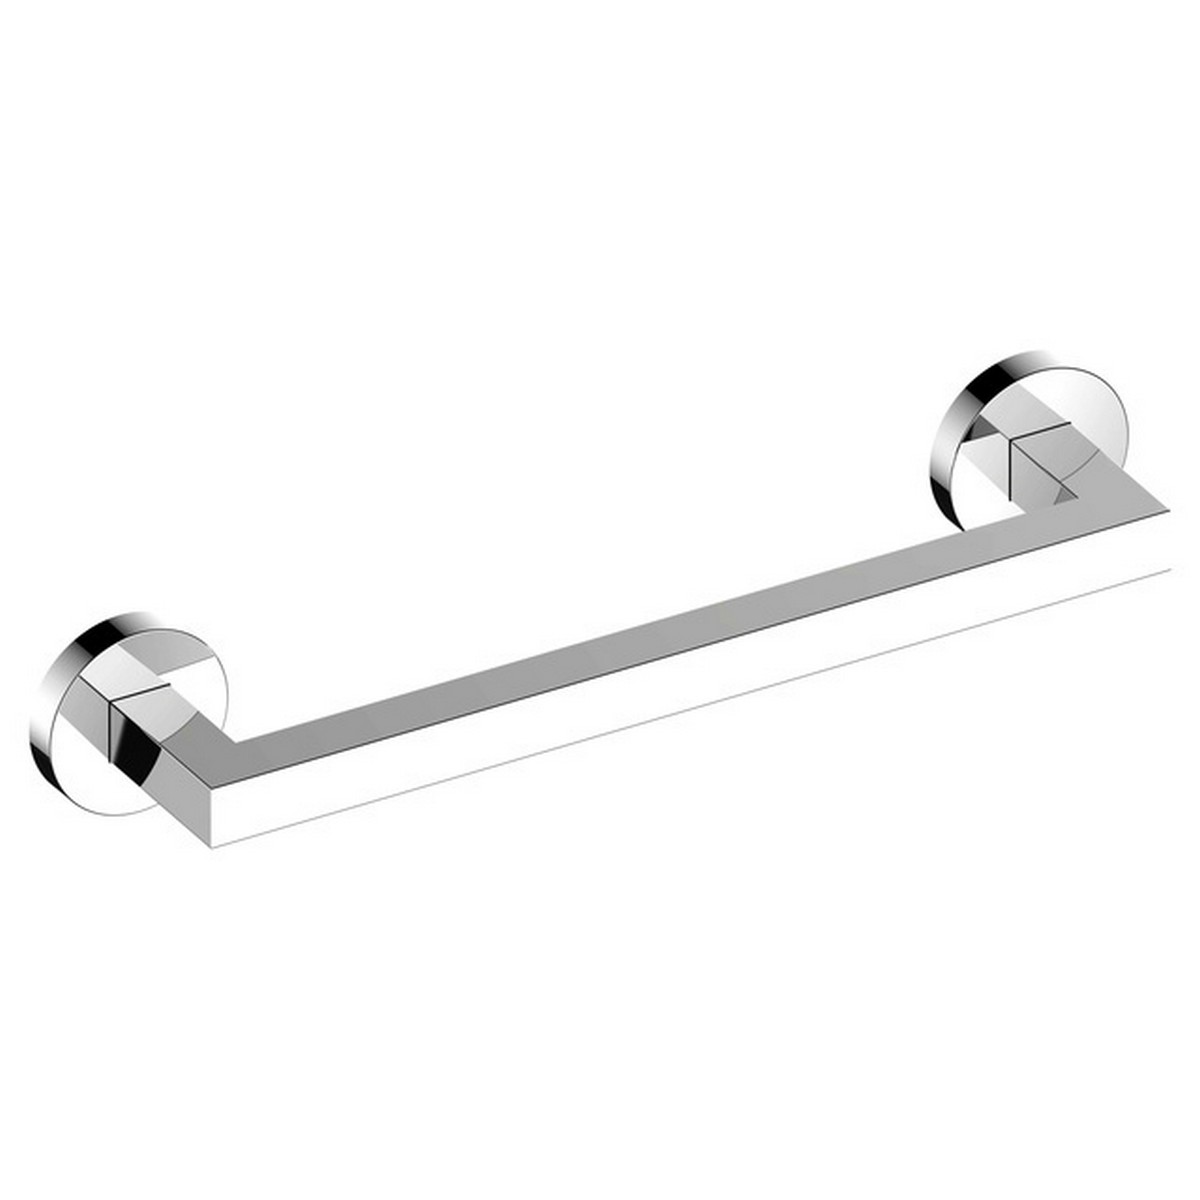 KEUCO 19007010000 EDITION 90 14 1/8 INCH WALL MOUNTED SUPPORT RAIL IN POLISHED CHROME